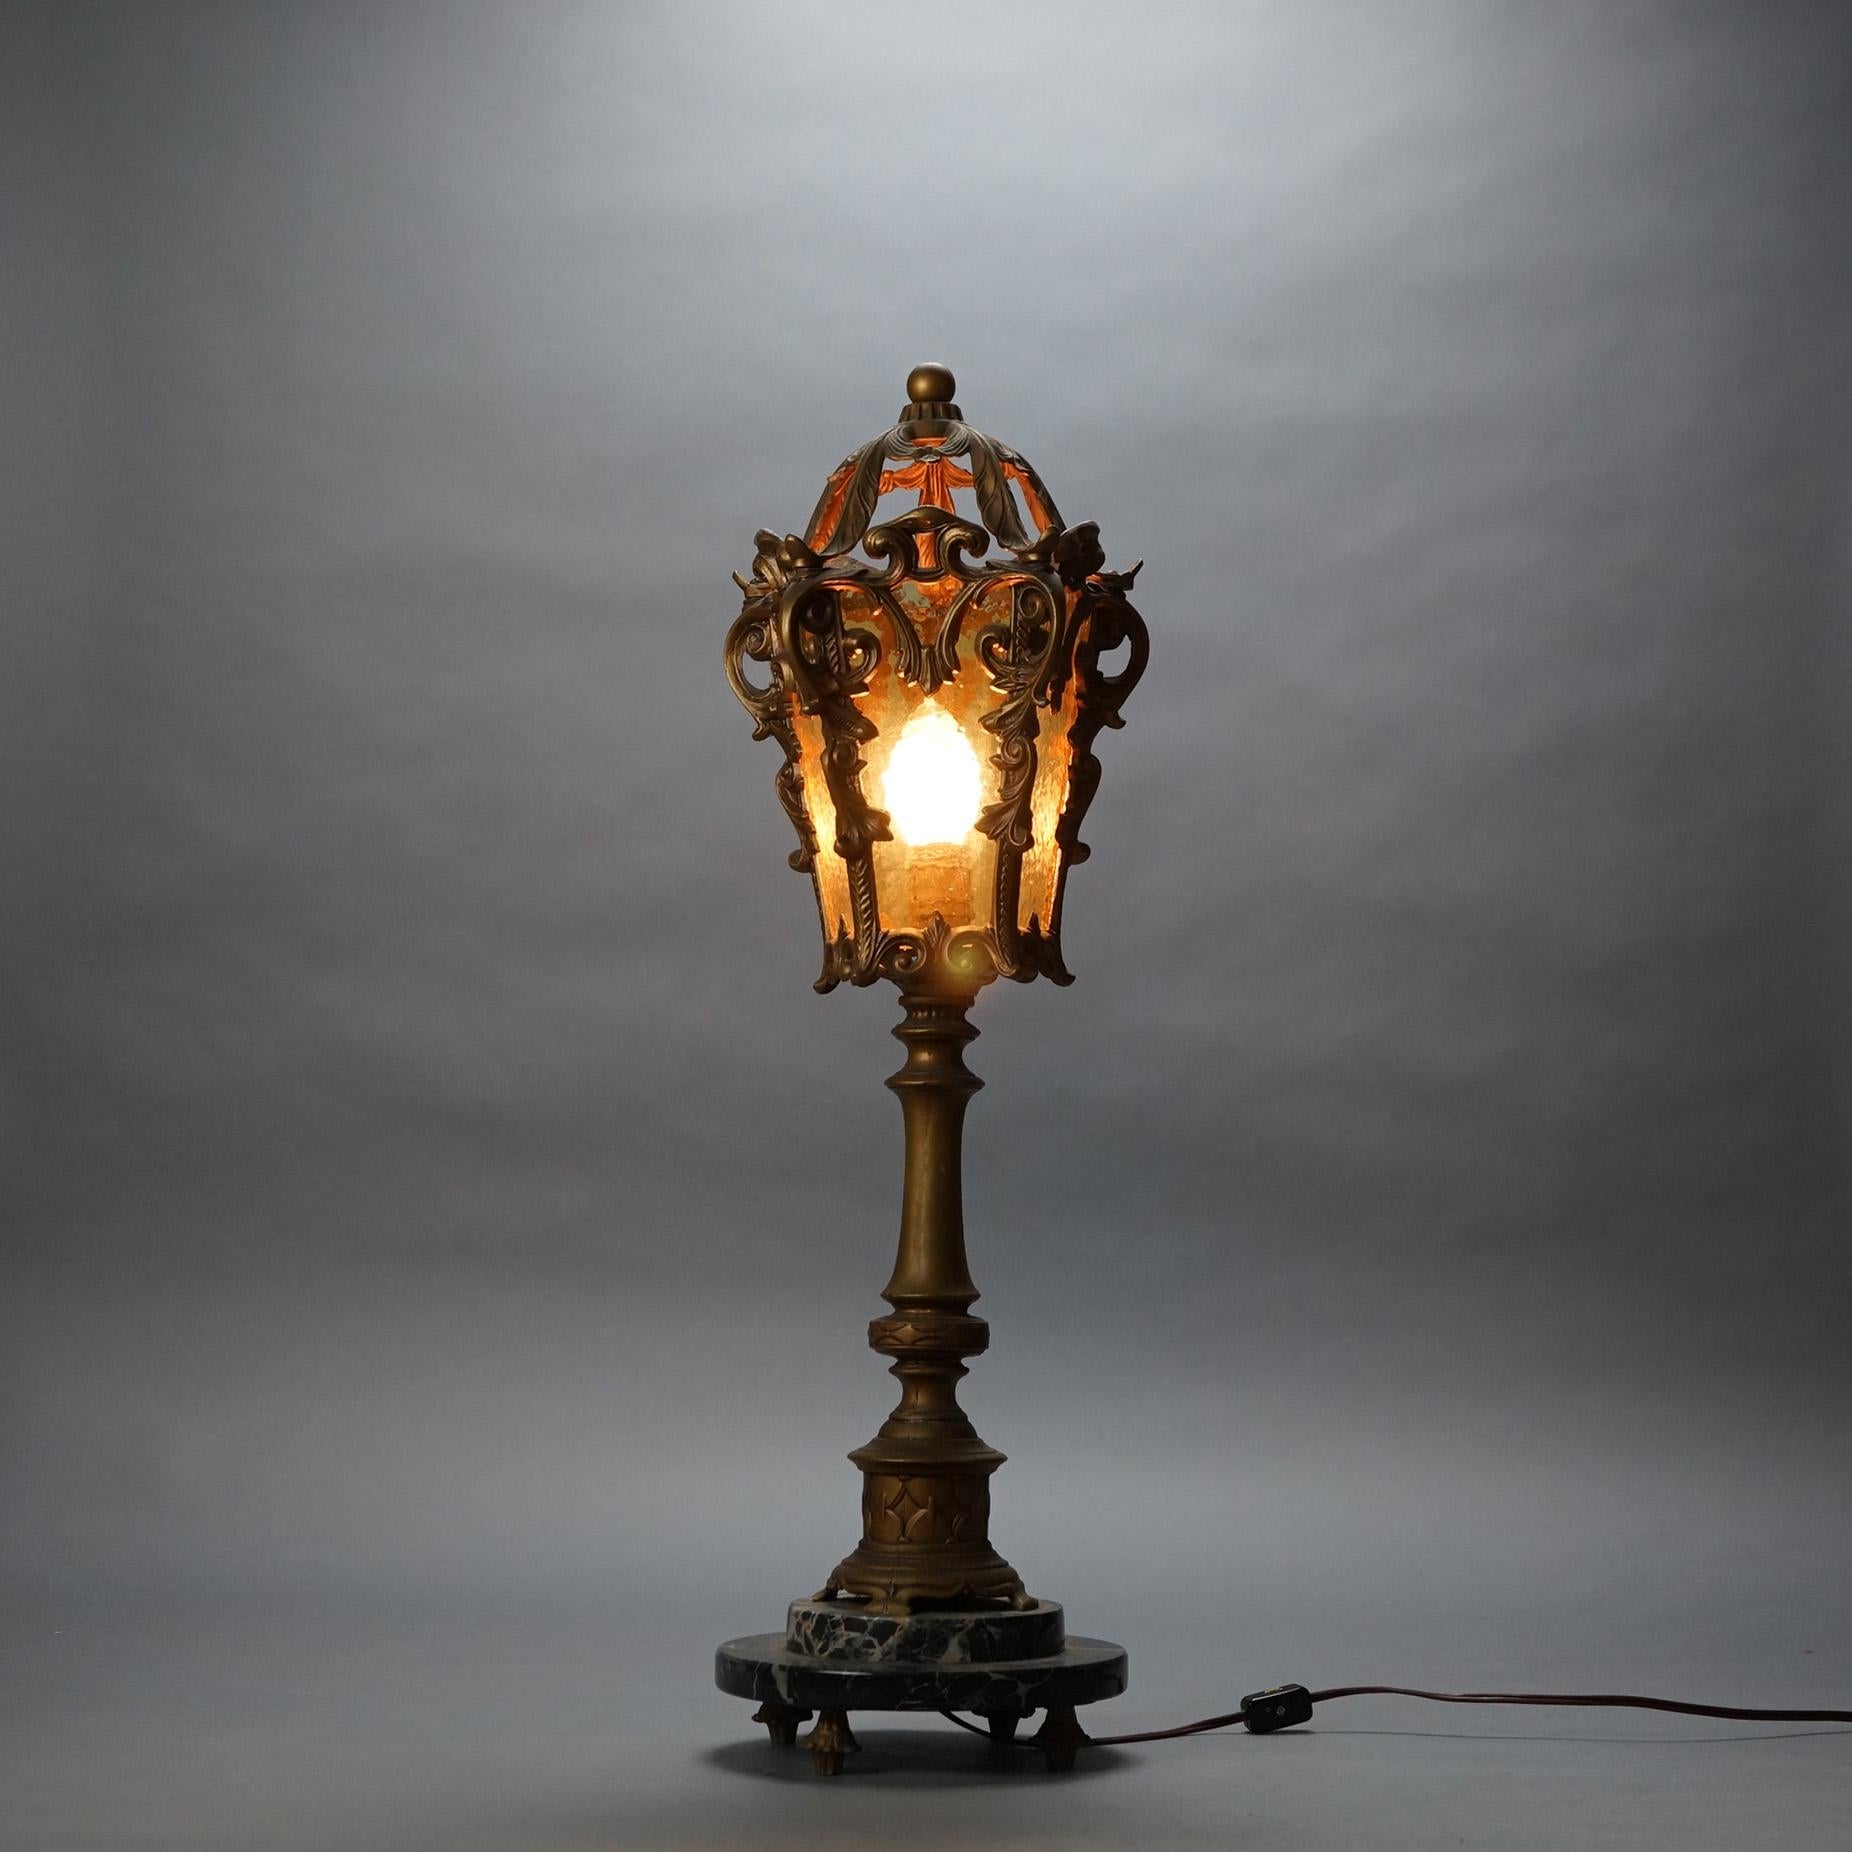 Antique Arts & Crafts Hammered Amber Glass Torchiere Table Lamp c1920 For Sale 3